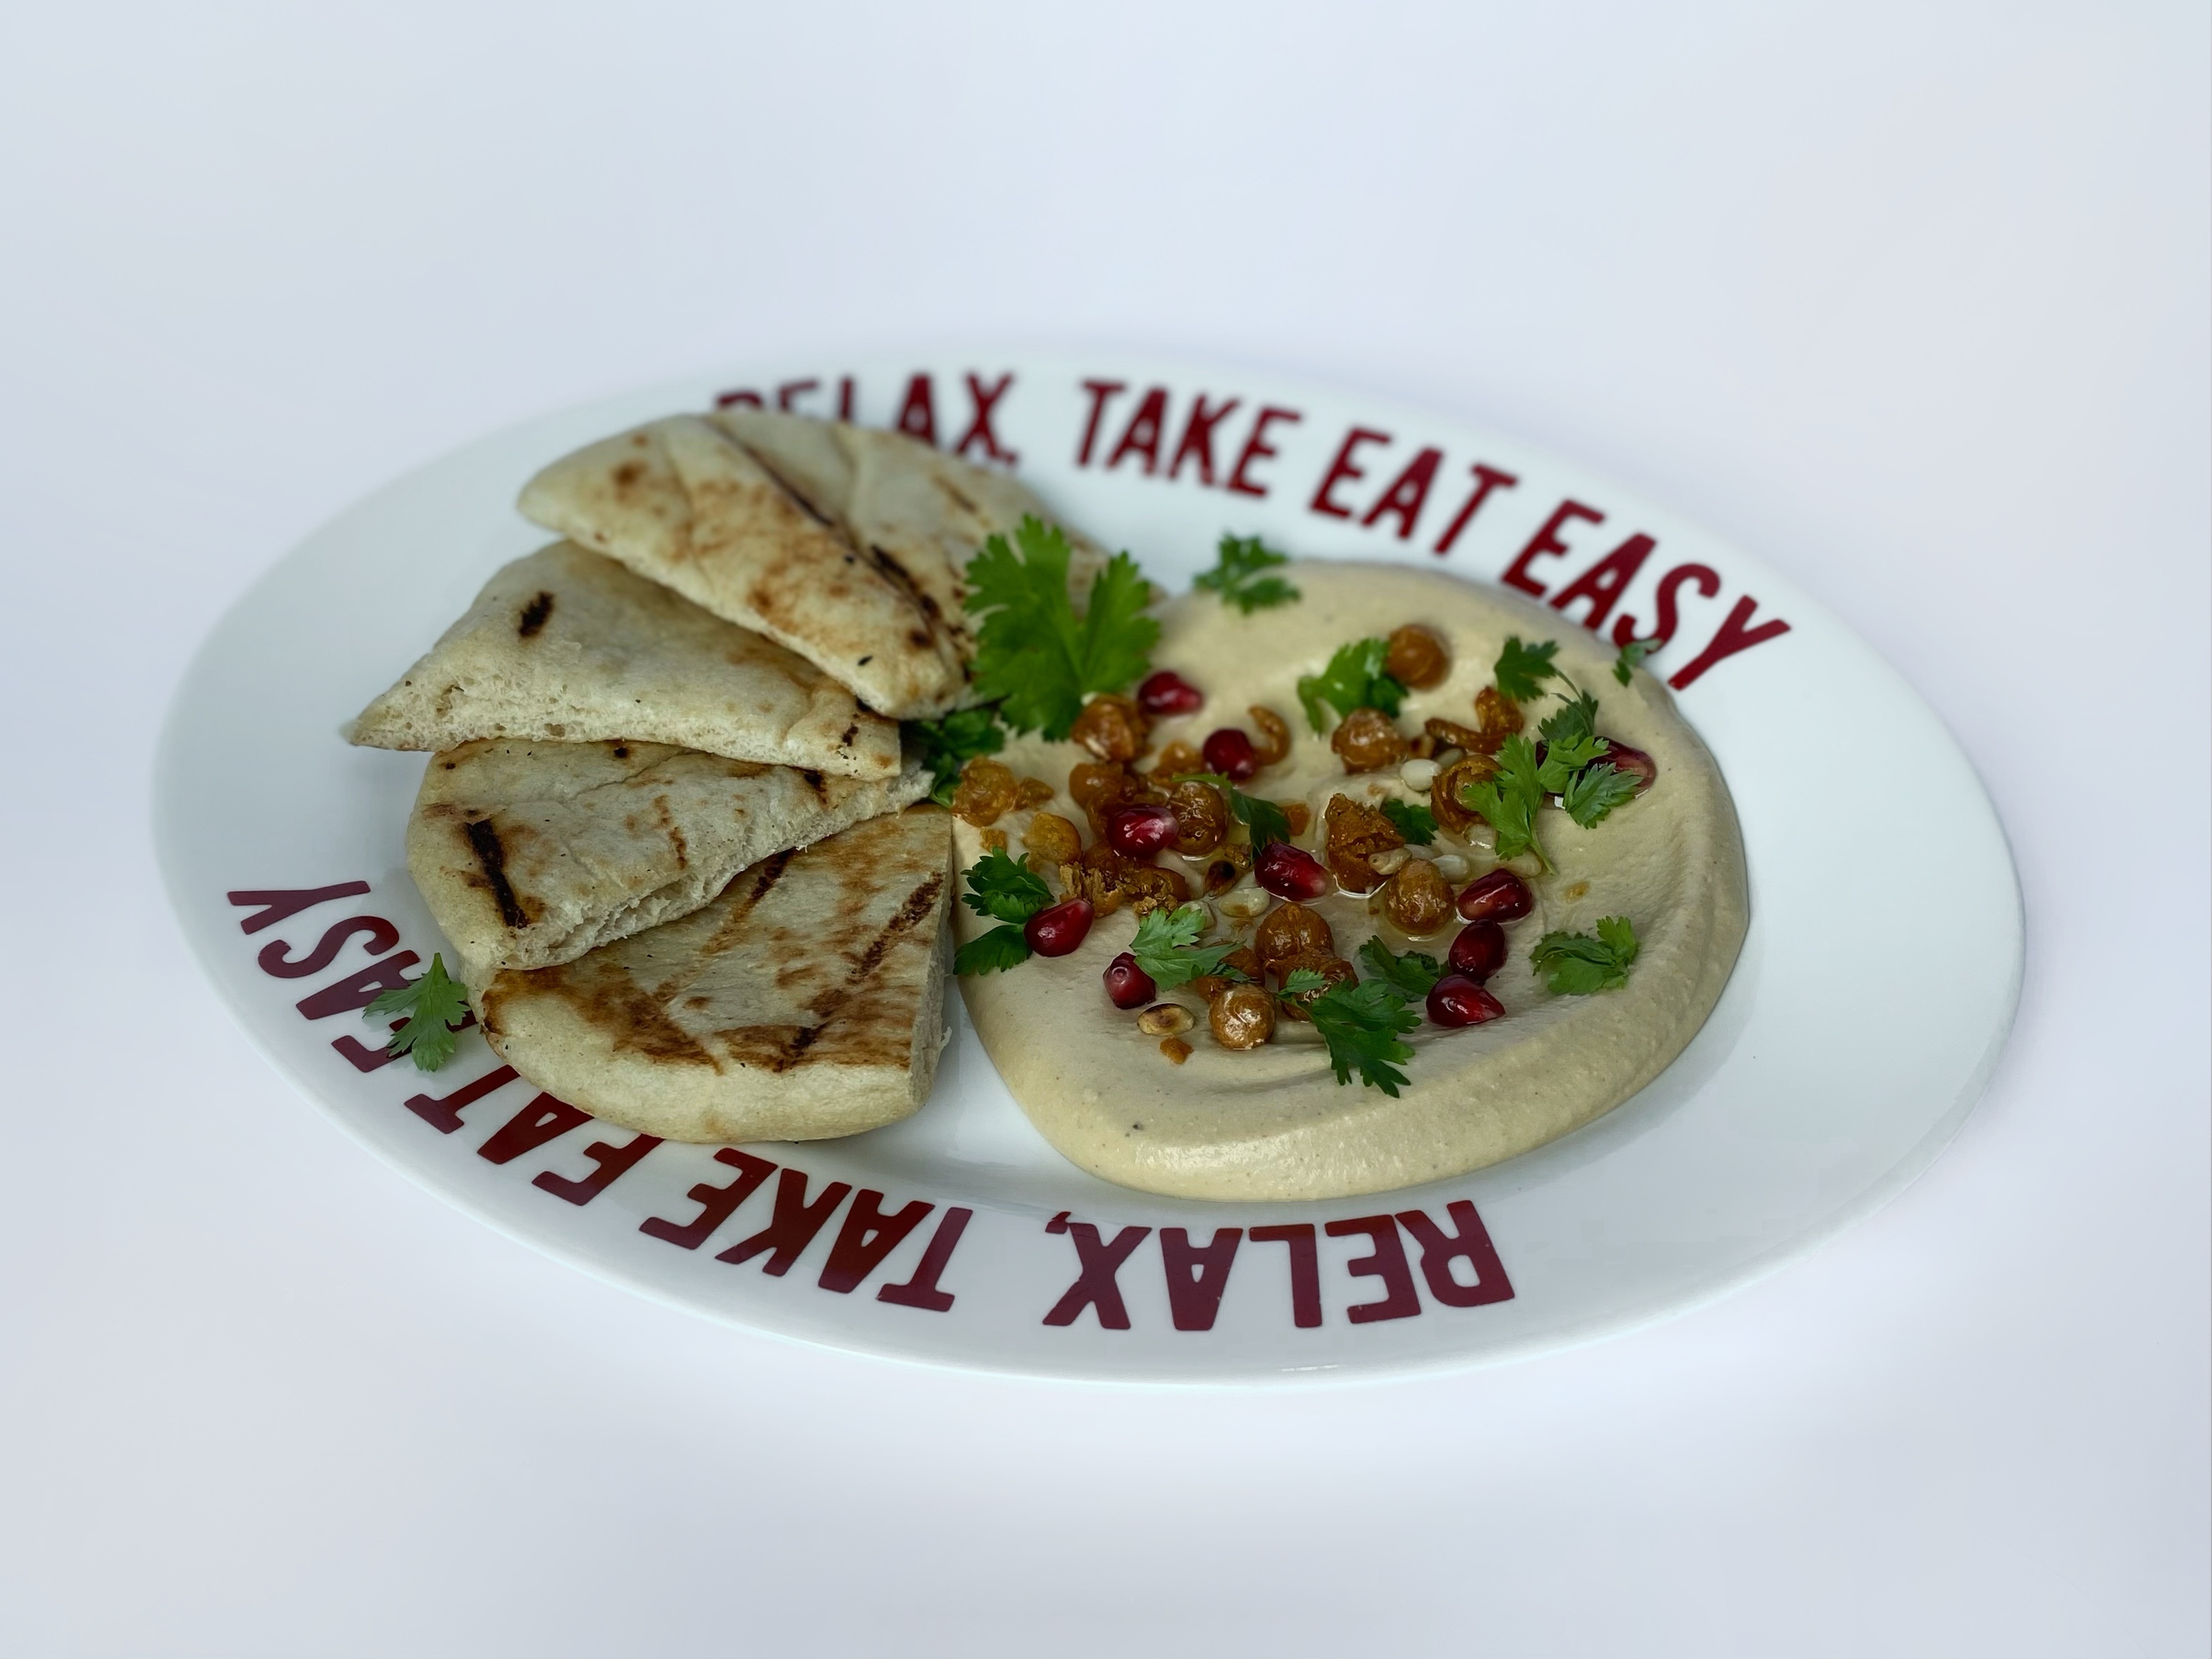 Hummus with pomegranate seeds, fried chickpeas, pine nuts and pita<br>